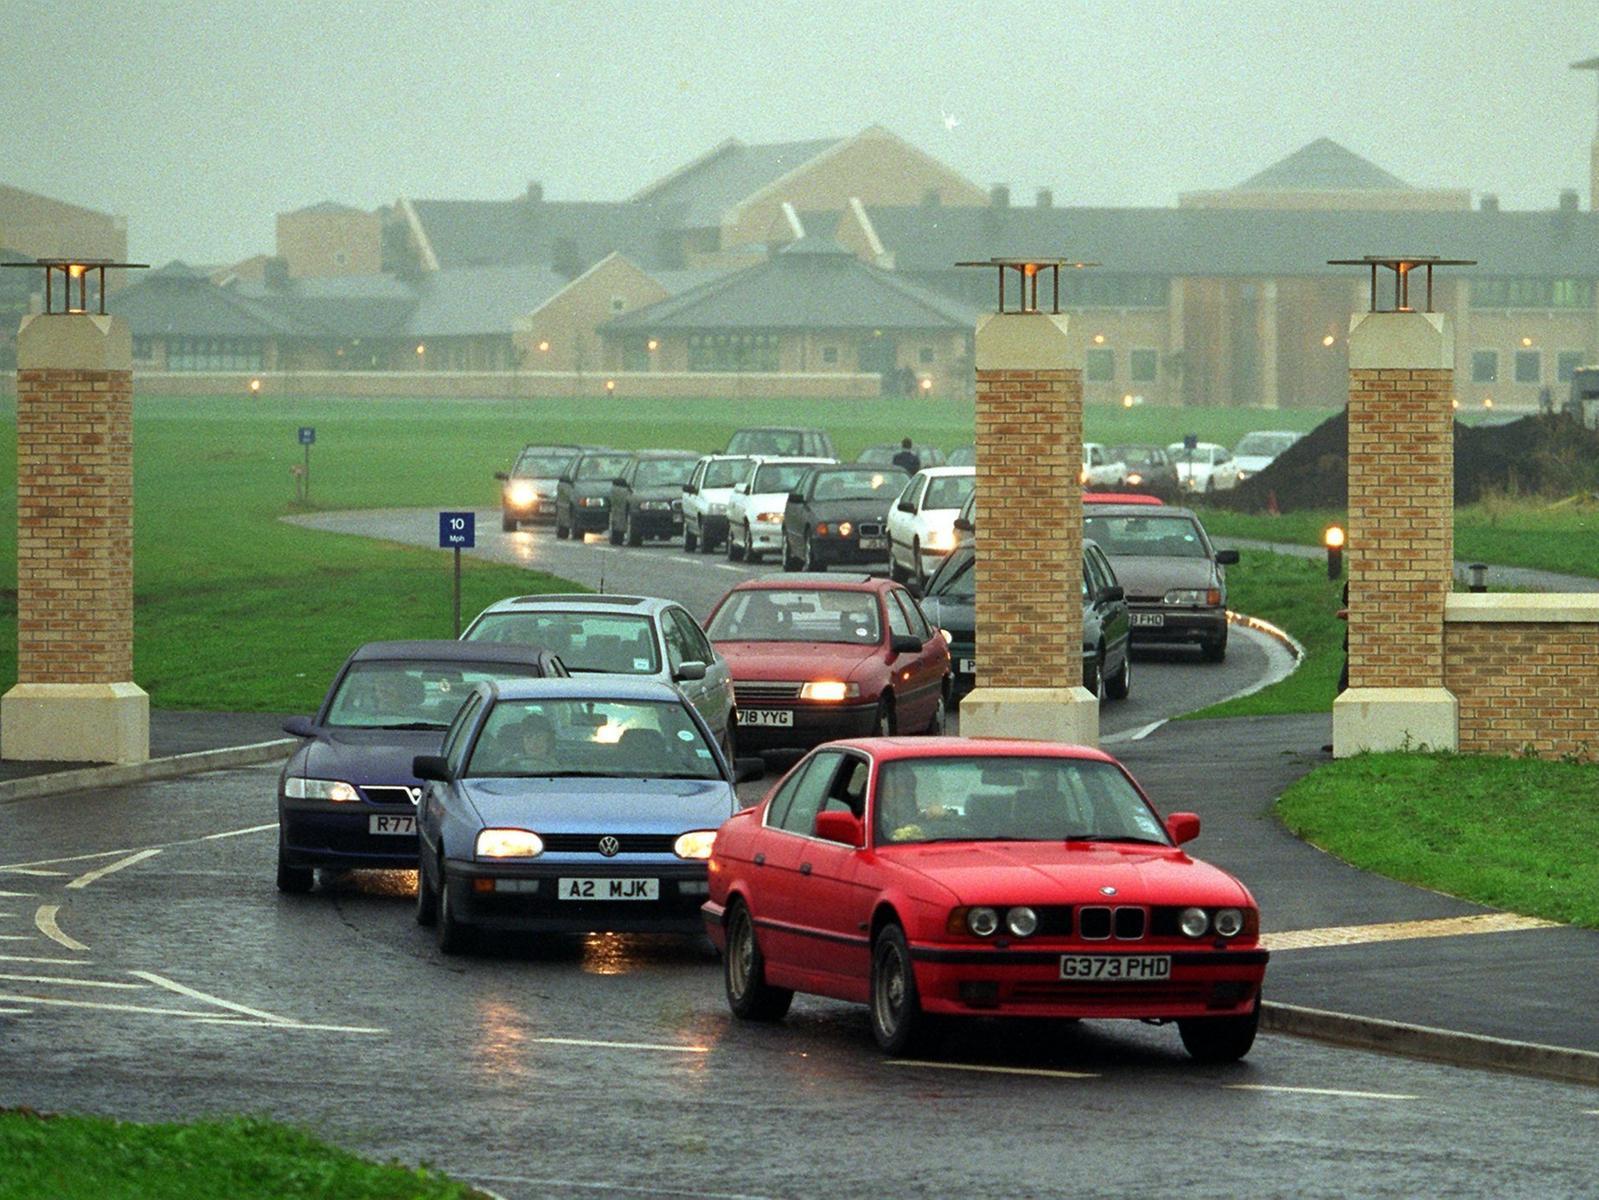 There was travel chaos in September 1997 with cars leaving Leeds Grammar School to join the inbound rush-hour traffic on the A61.